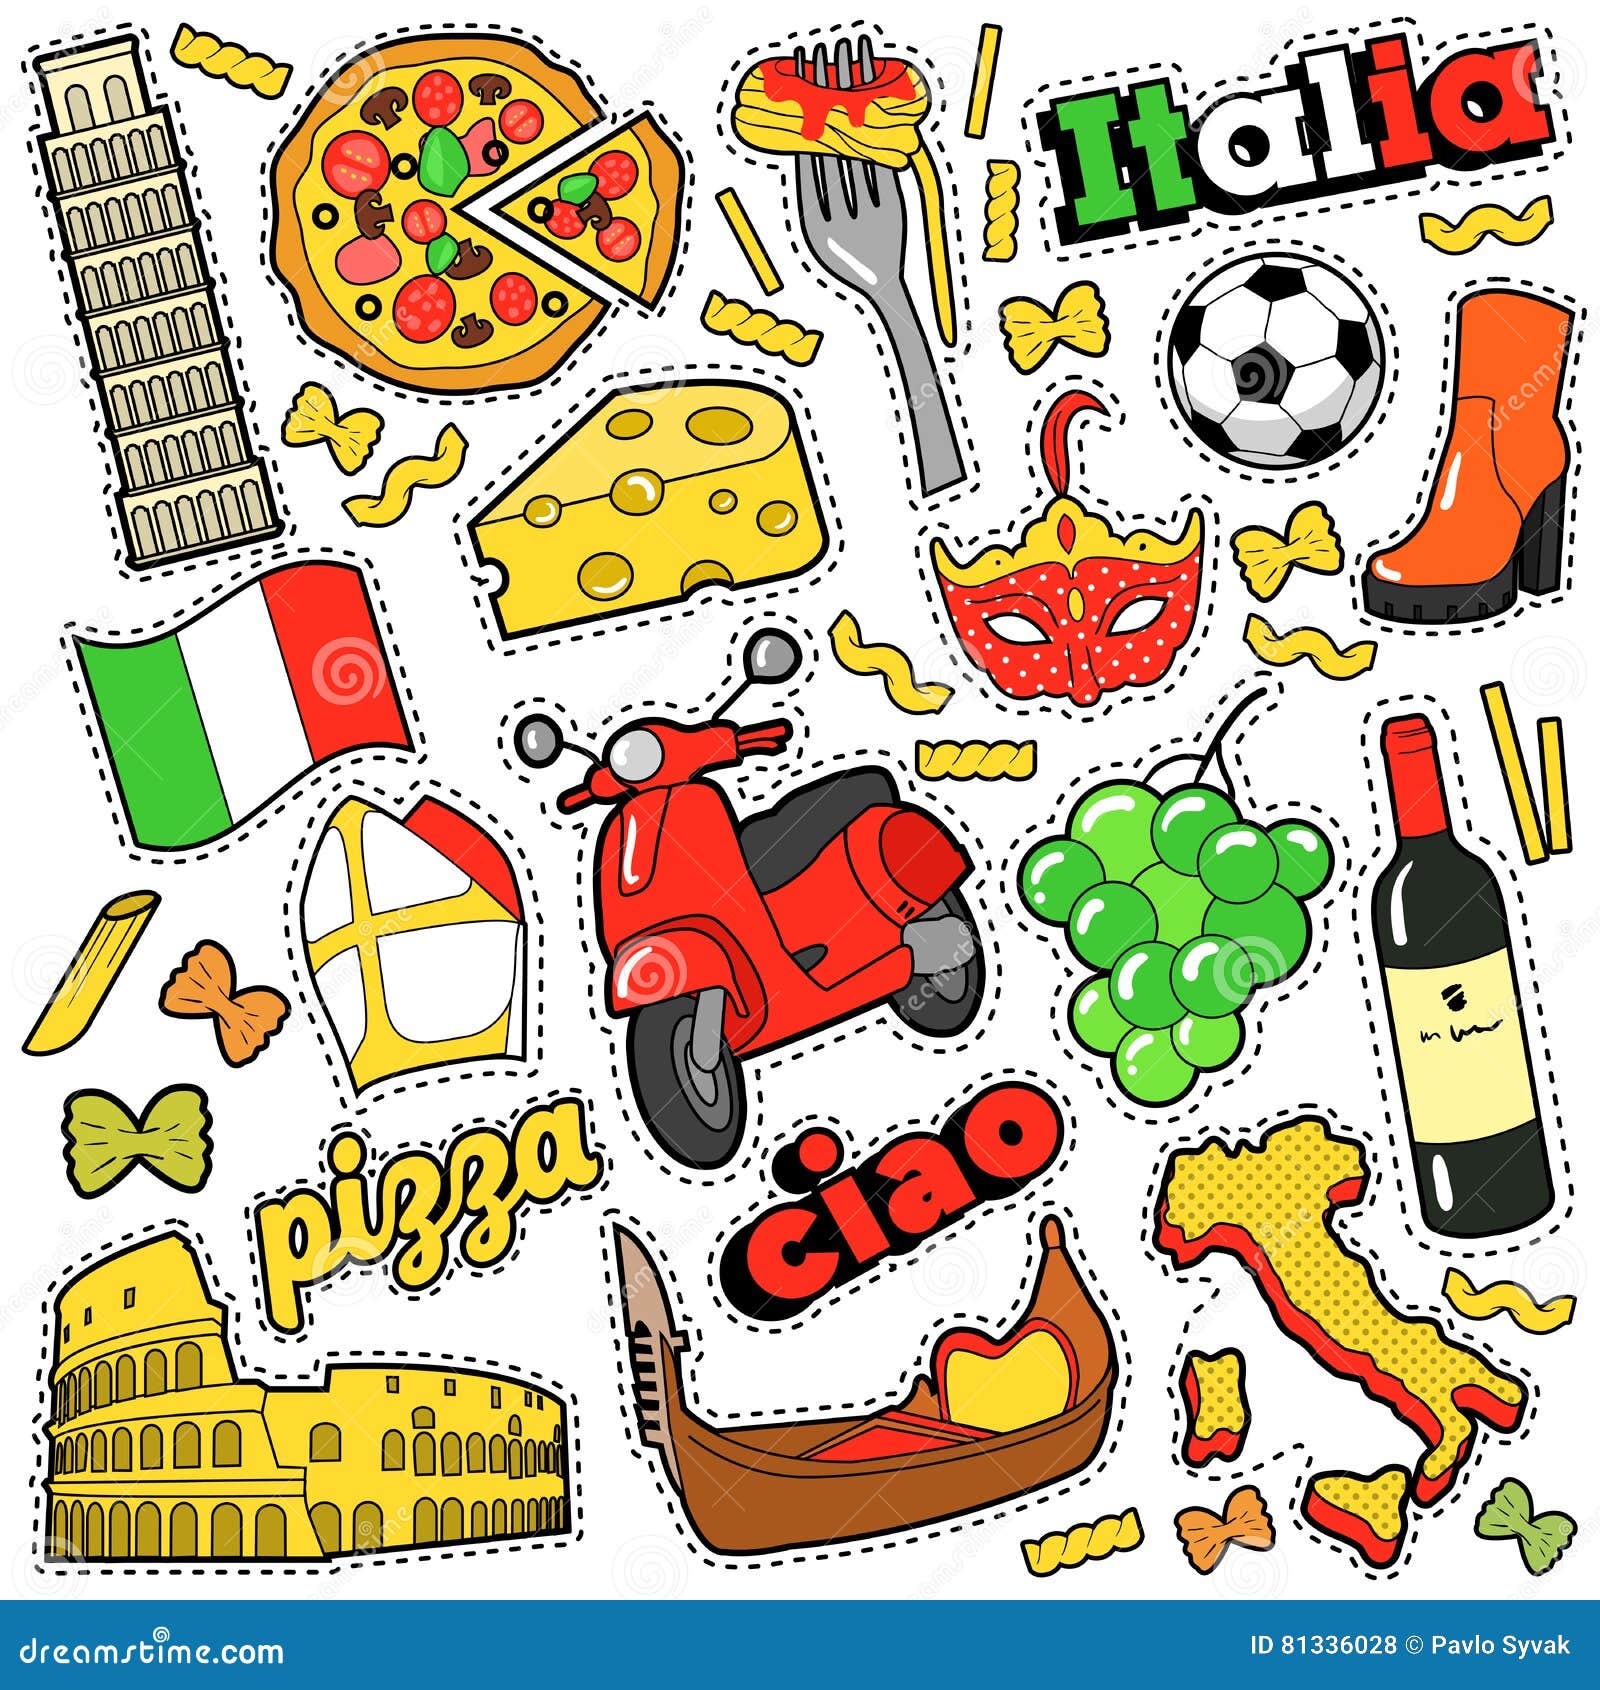 italy travel scrapbook stickers, patches, badges for prints with pizza, venetian mask, architecture and italian s